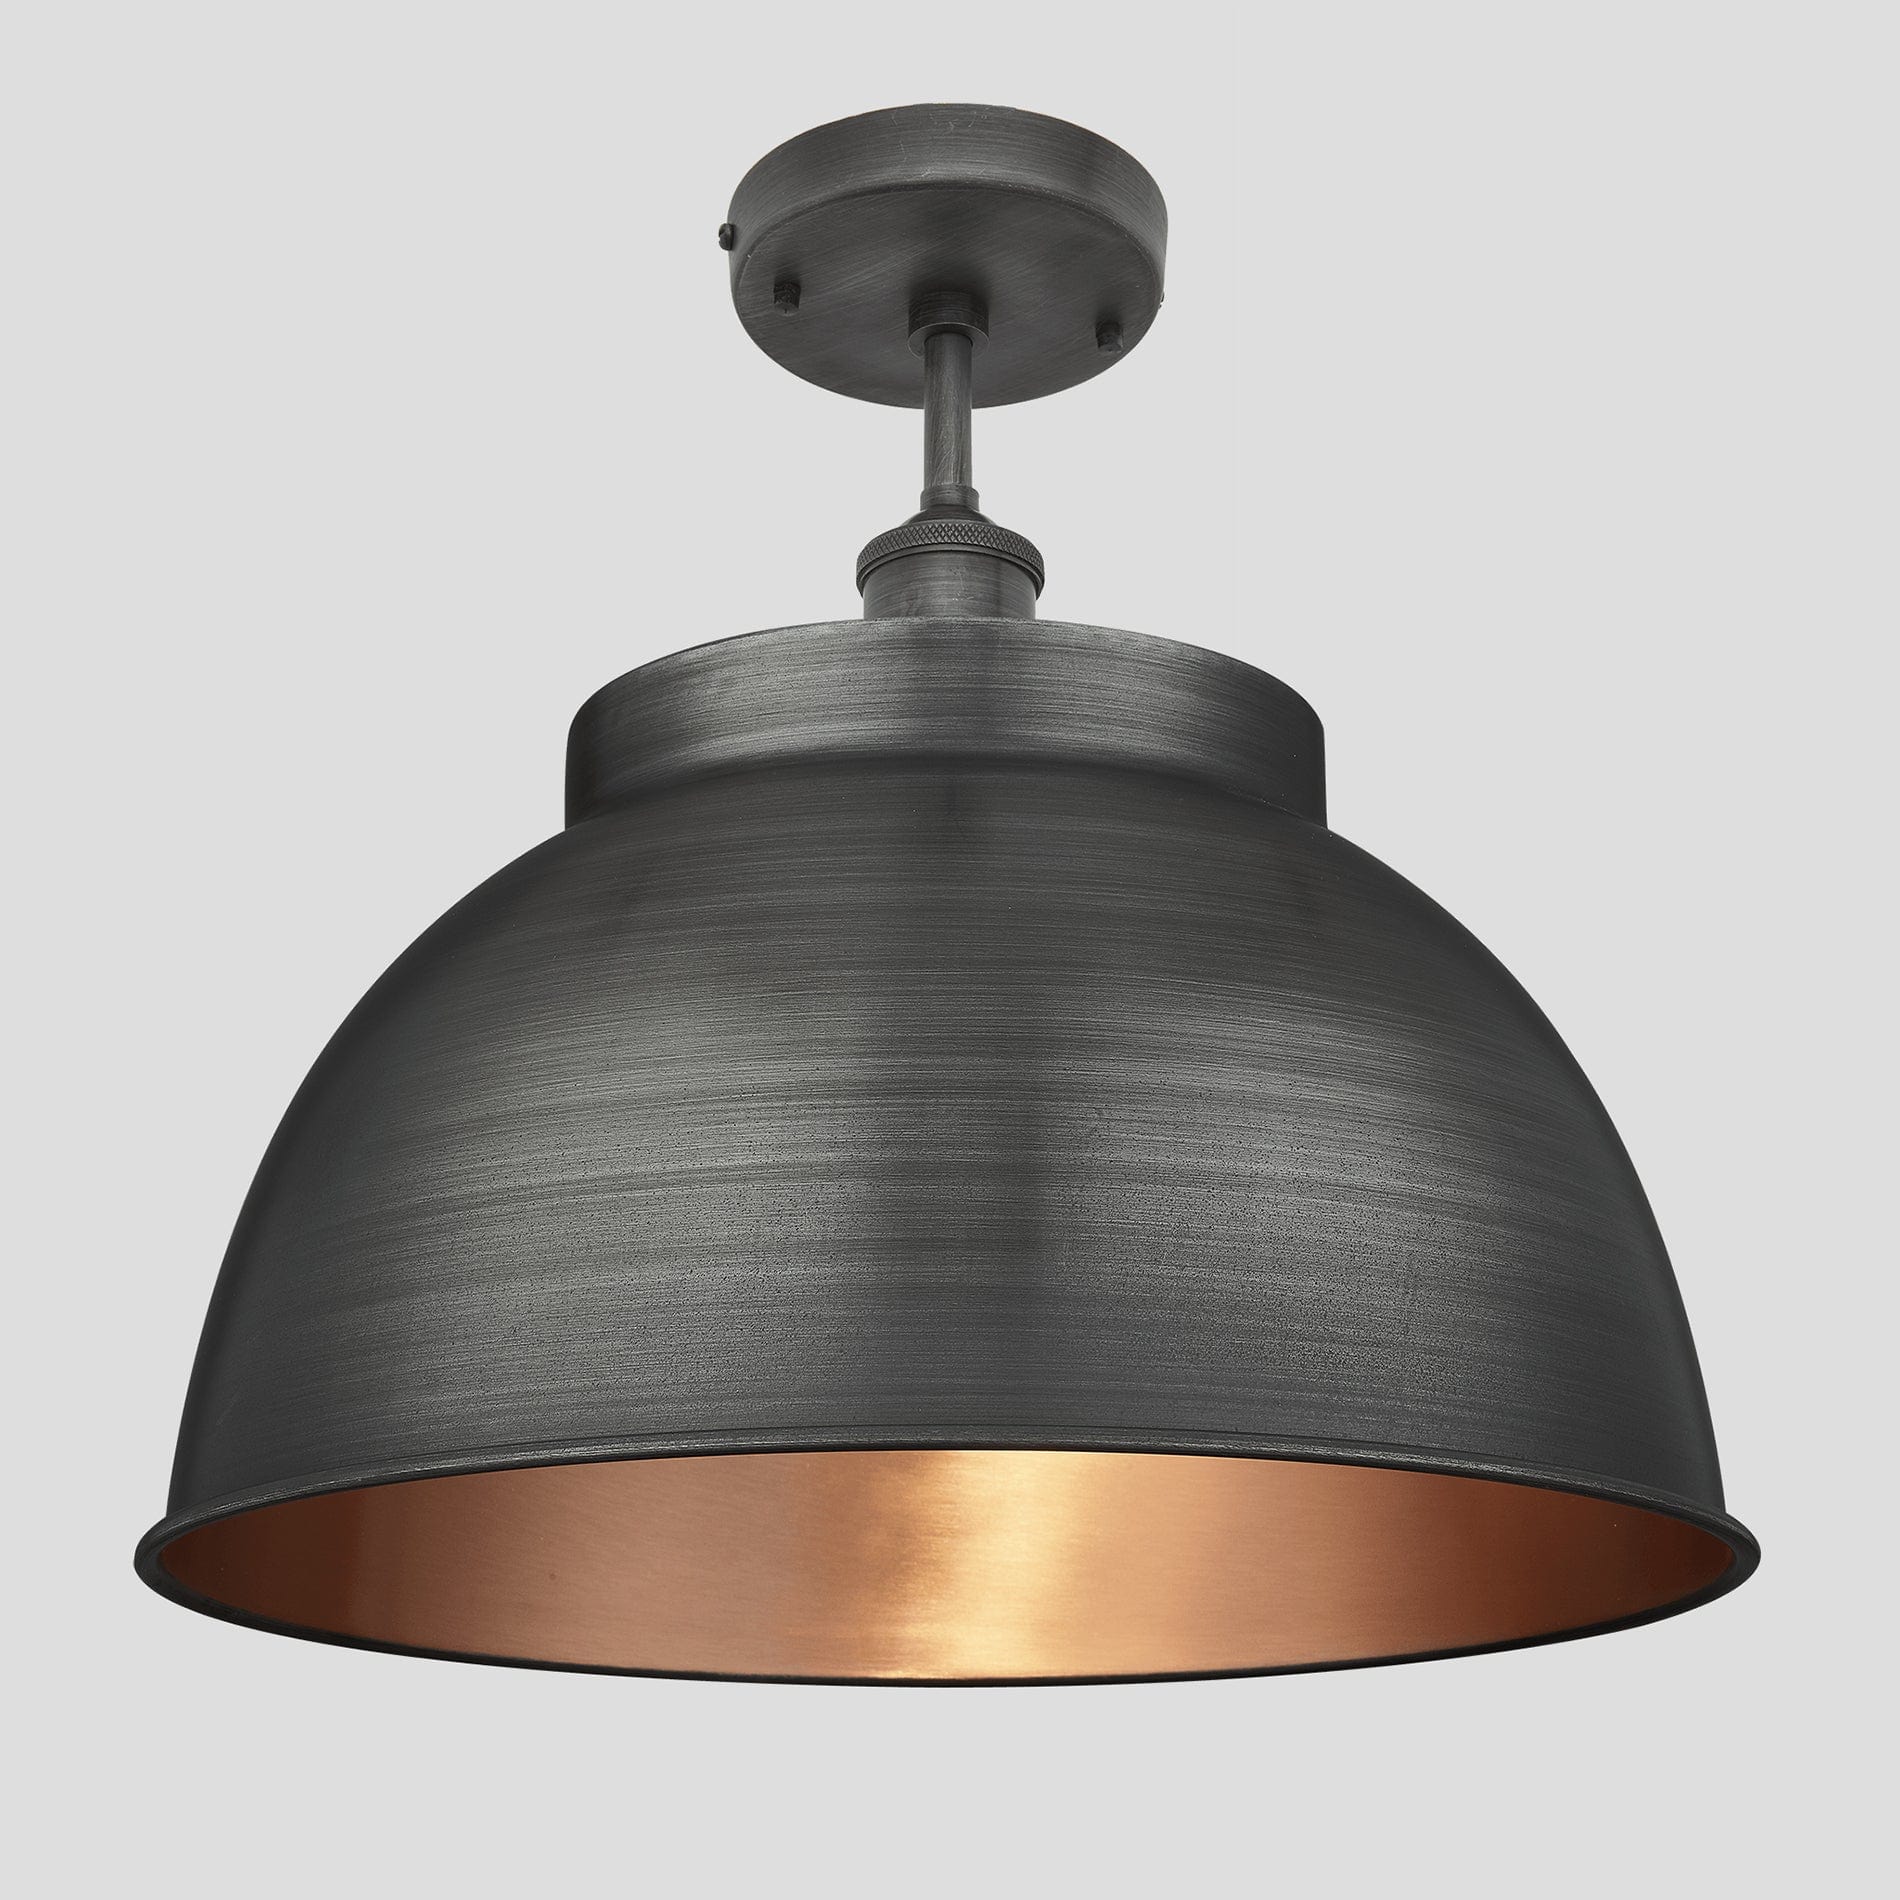 Brooklyn Dome Flush Mount - 17 Inch - Pewter & Copper Industville BR-DFM17-CP-PH